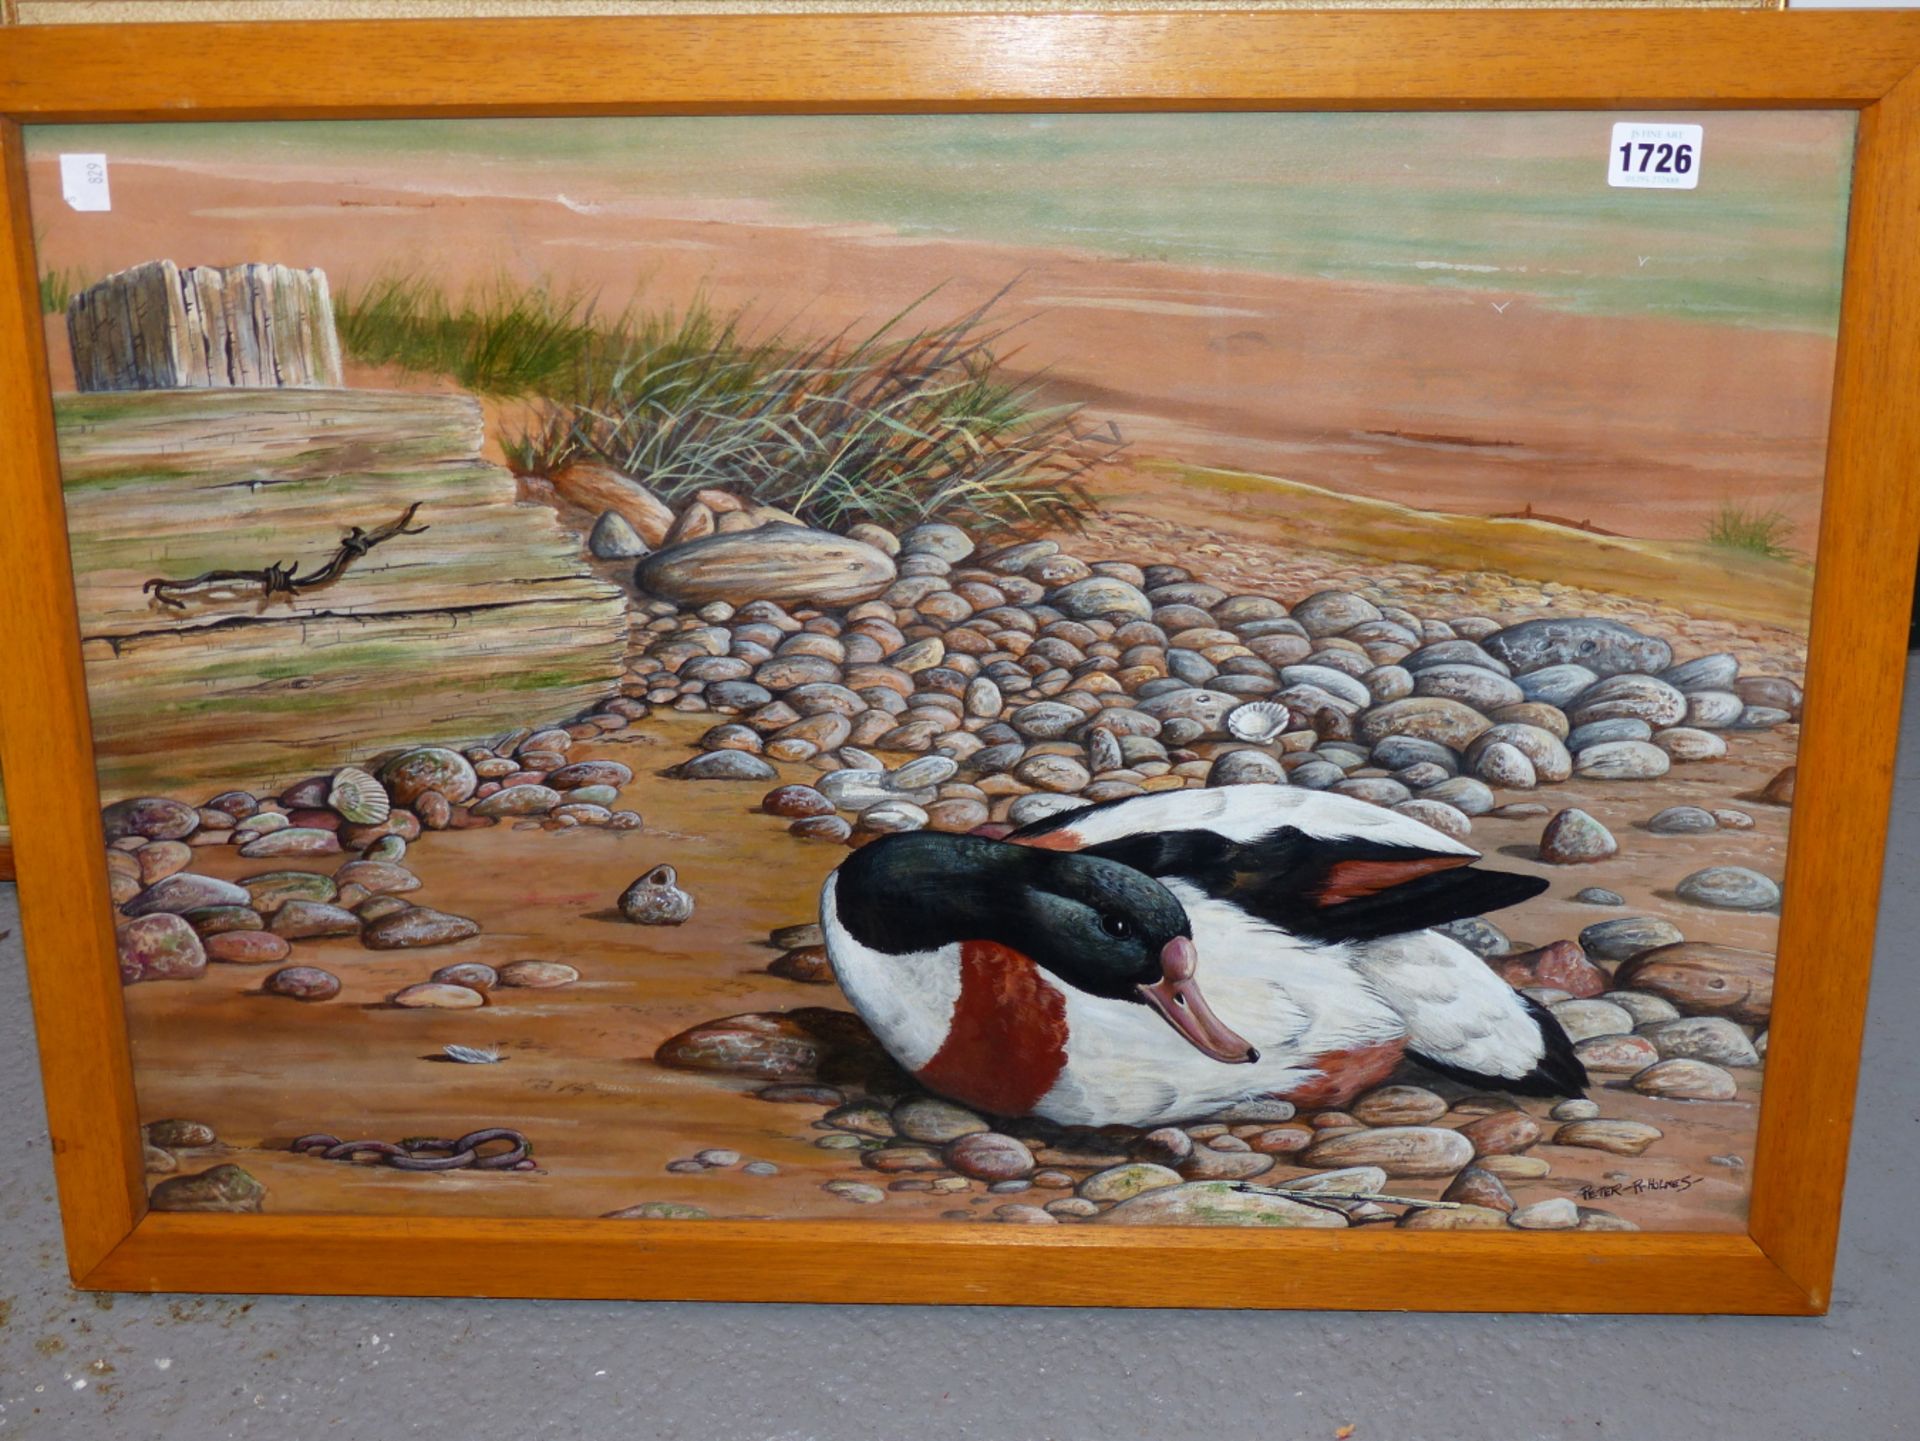 PETER R. HOLMES, 20TH C. COMMON SHELLDUCK ON A WINDSWEPT PEBBLE BEACH. OIL ON BOARD, 43 X 65 CM. - Image 2 of 4